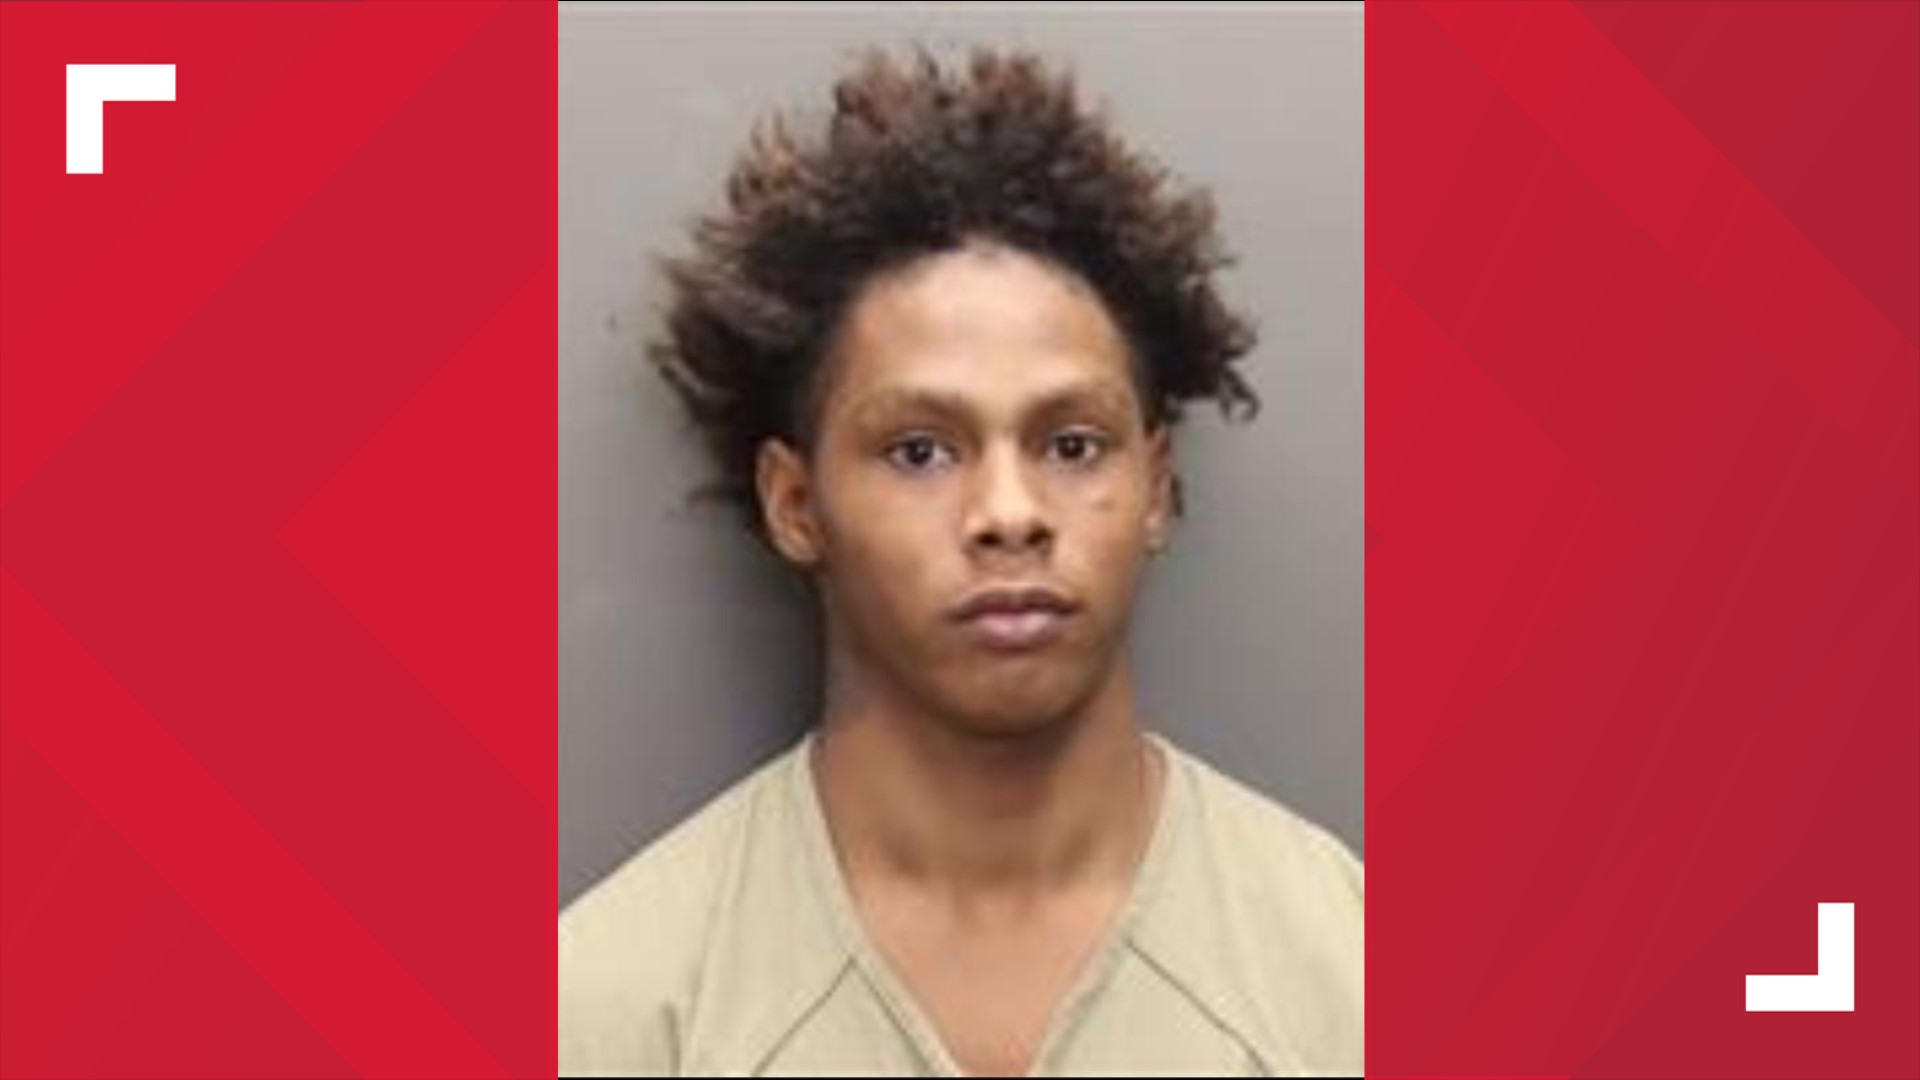 Tyyuan Sullivan, 19, was arrested in the 3200 block of Rabbit Hill Lane, off of Chatterton Road, in east Columbus on Thursday.